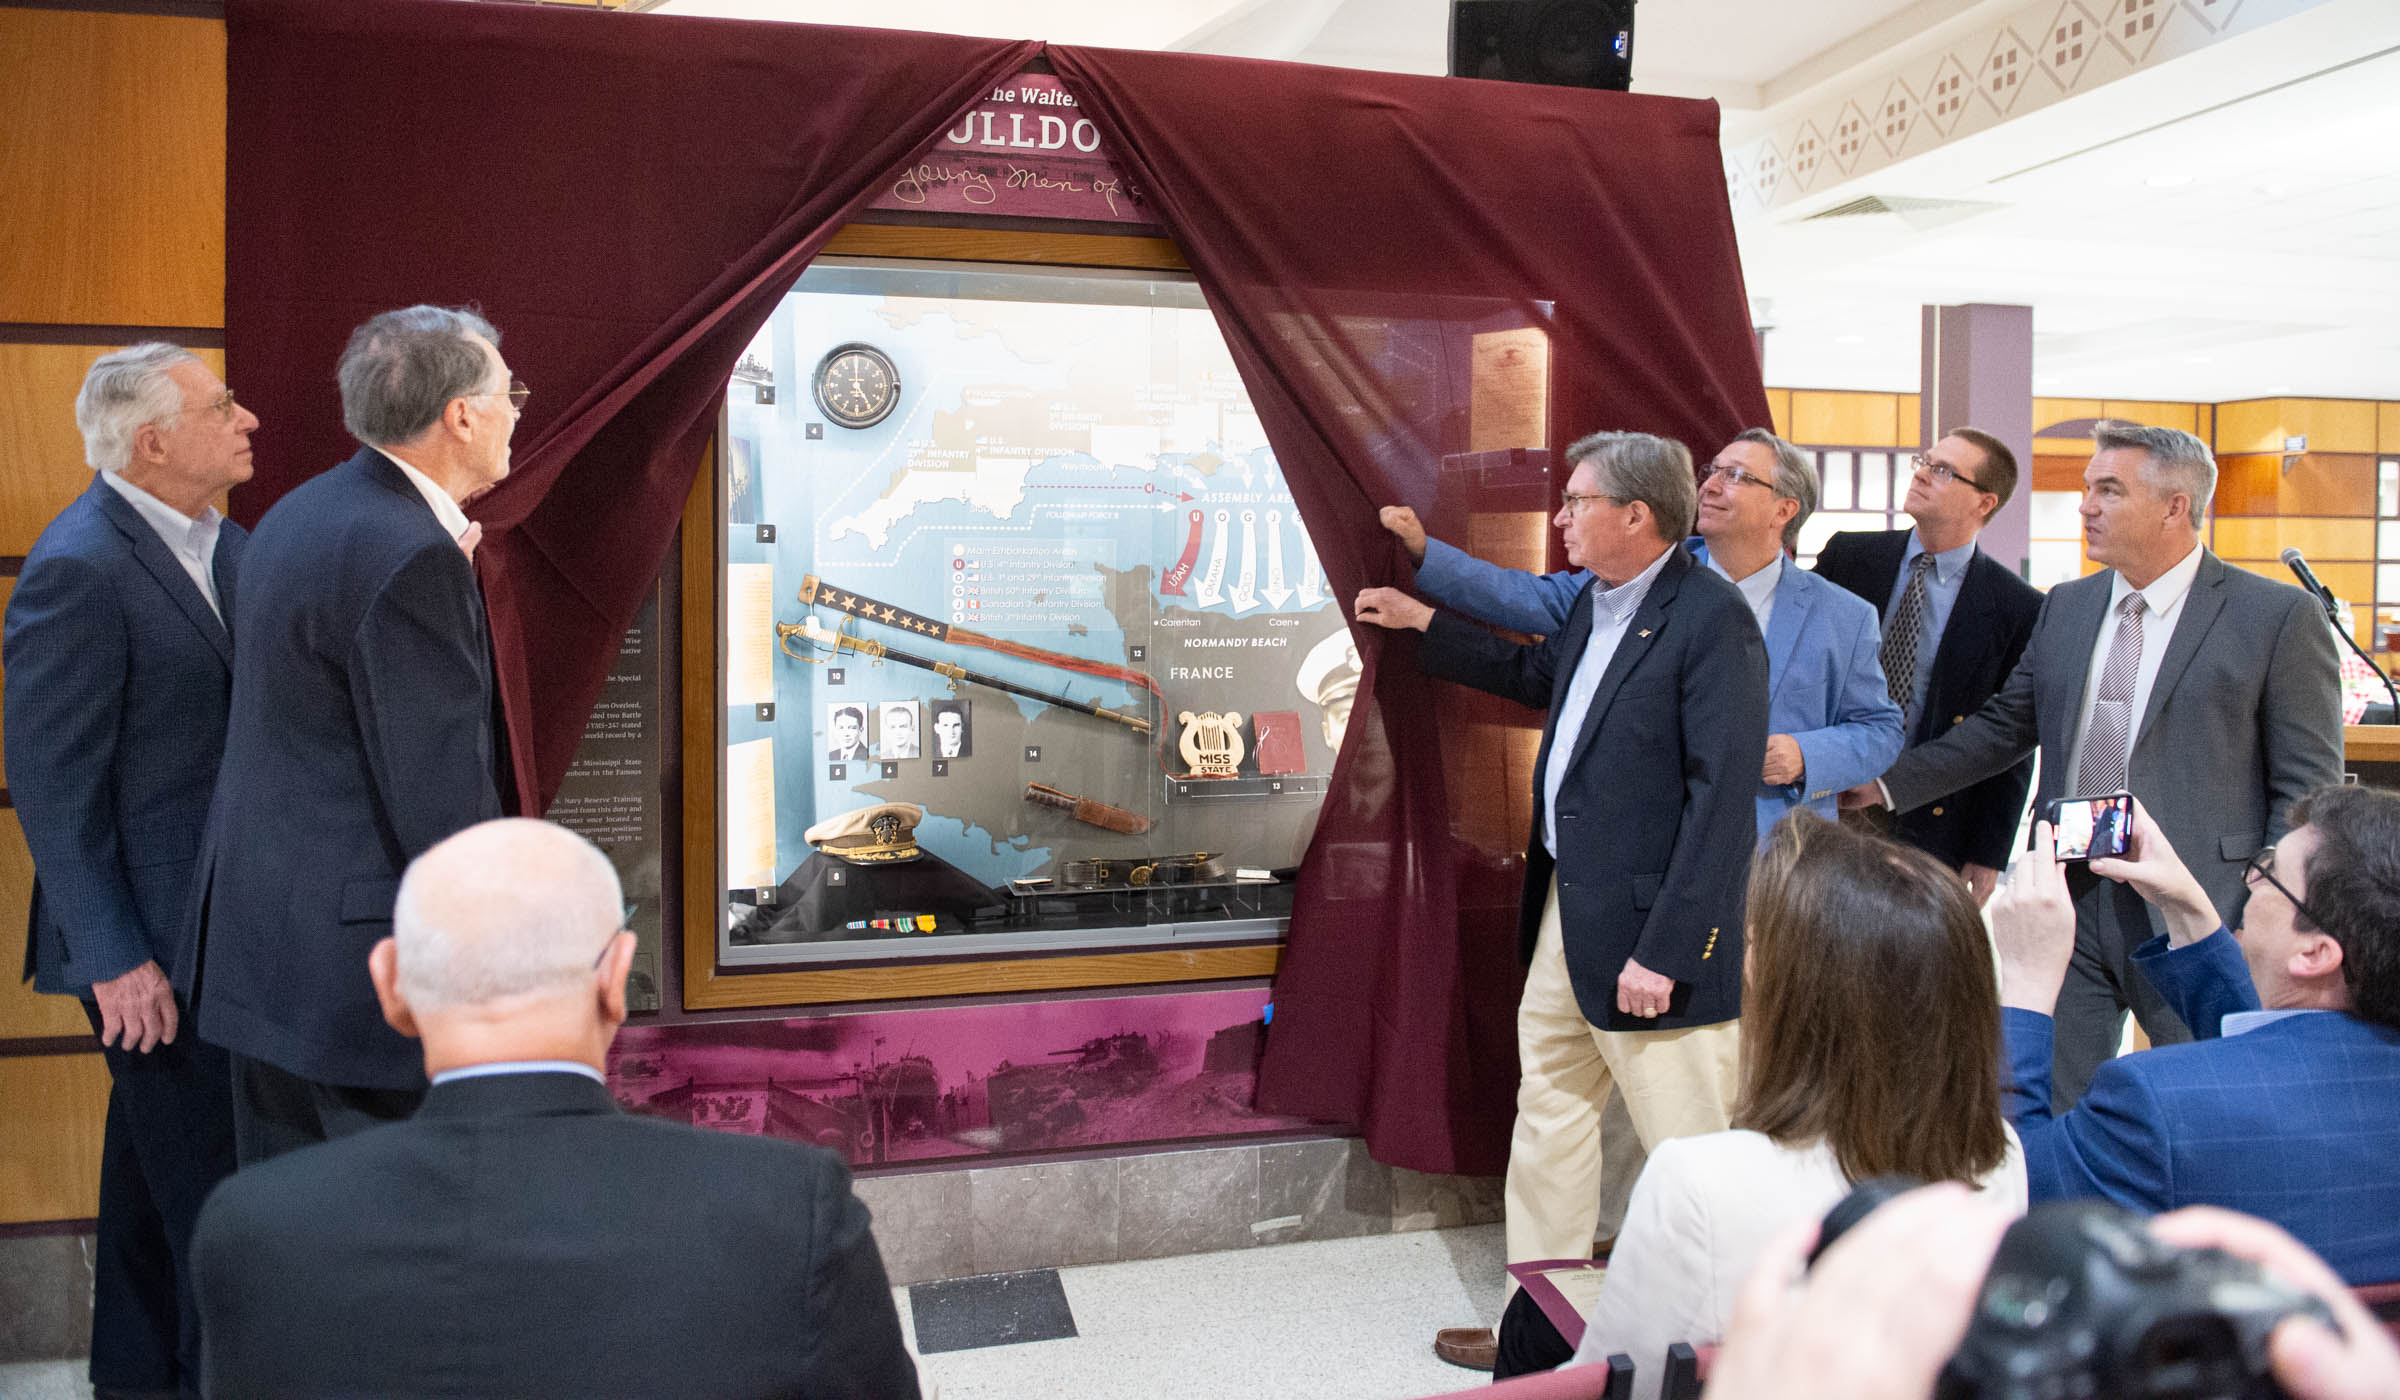 Dedication event participants pull back the maroon curtain, revealing the lit glass case containing WWII alumni Wallace&#039;s artifacts and memorbilia.